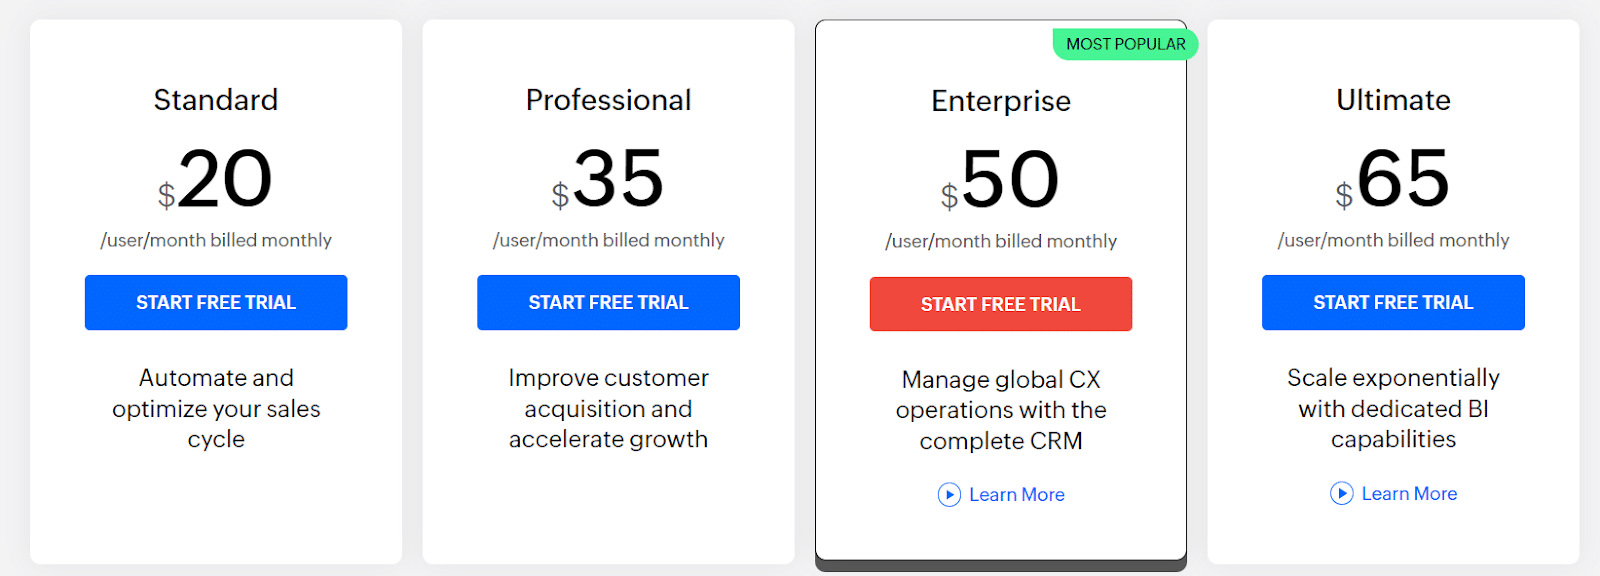 Zoho CRM Pricing